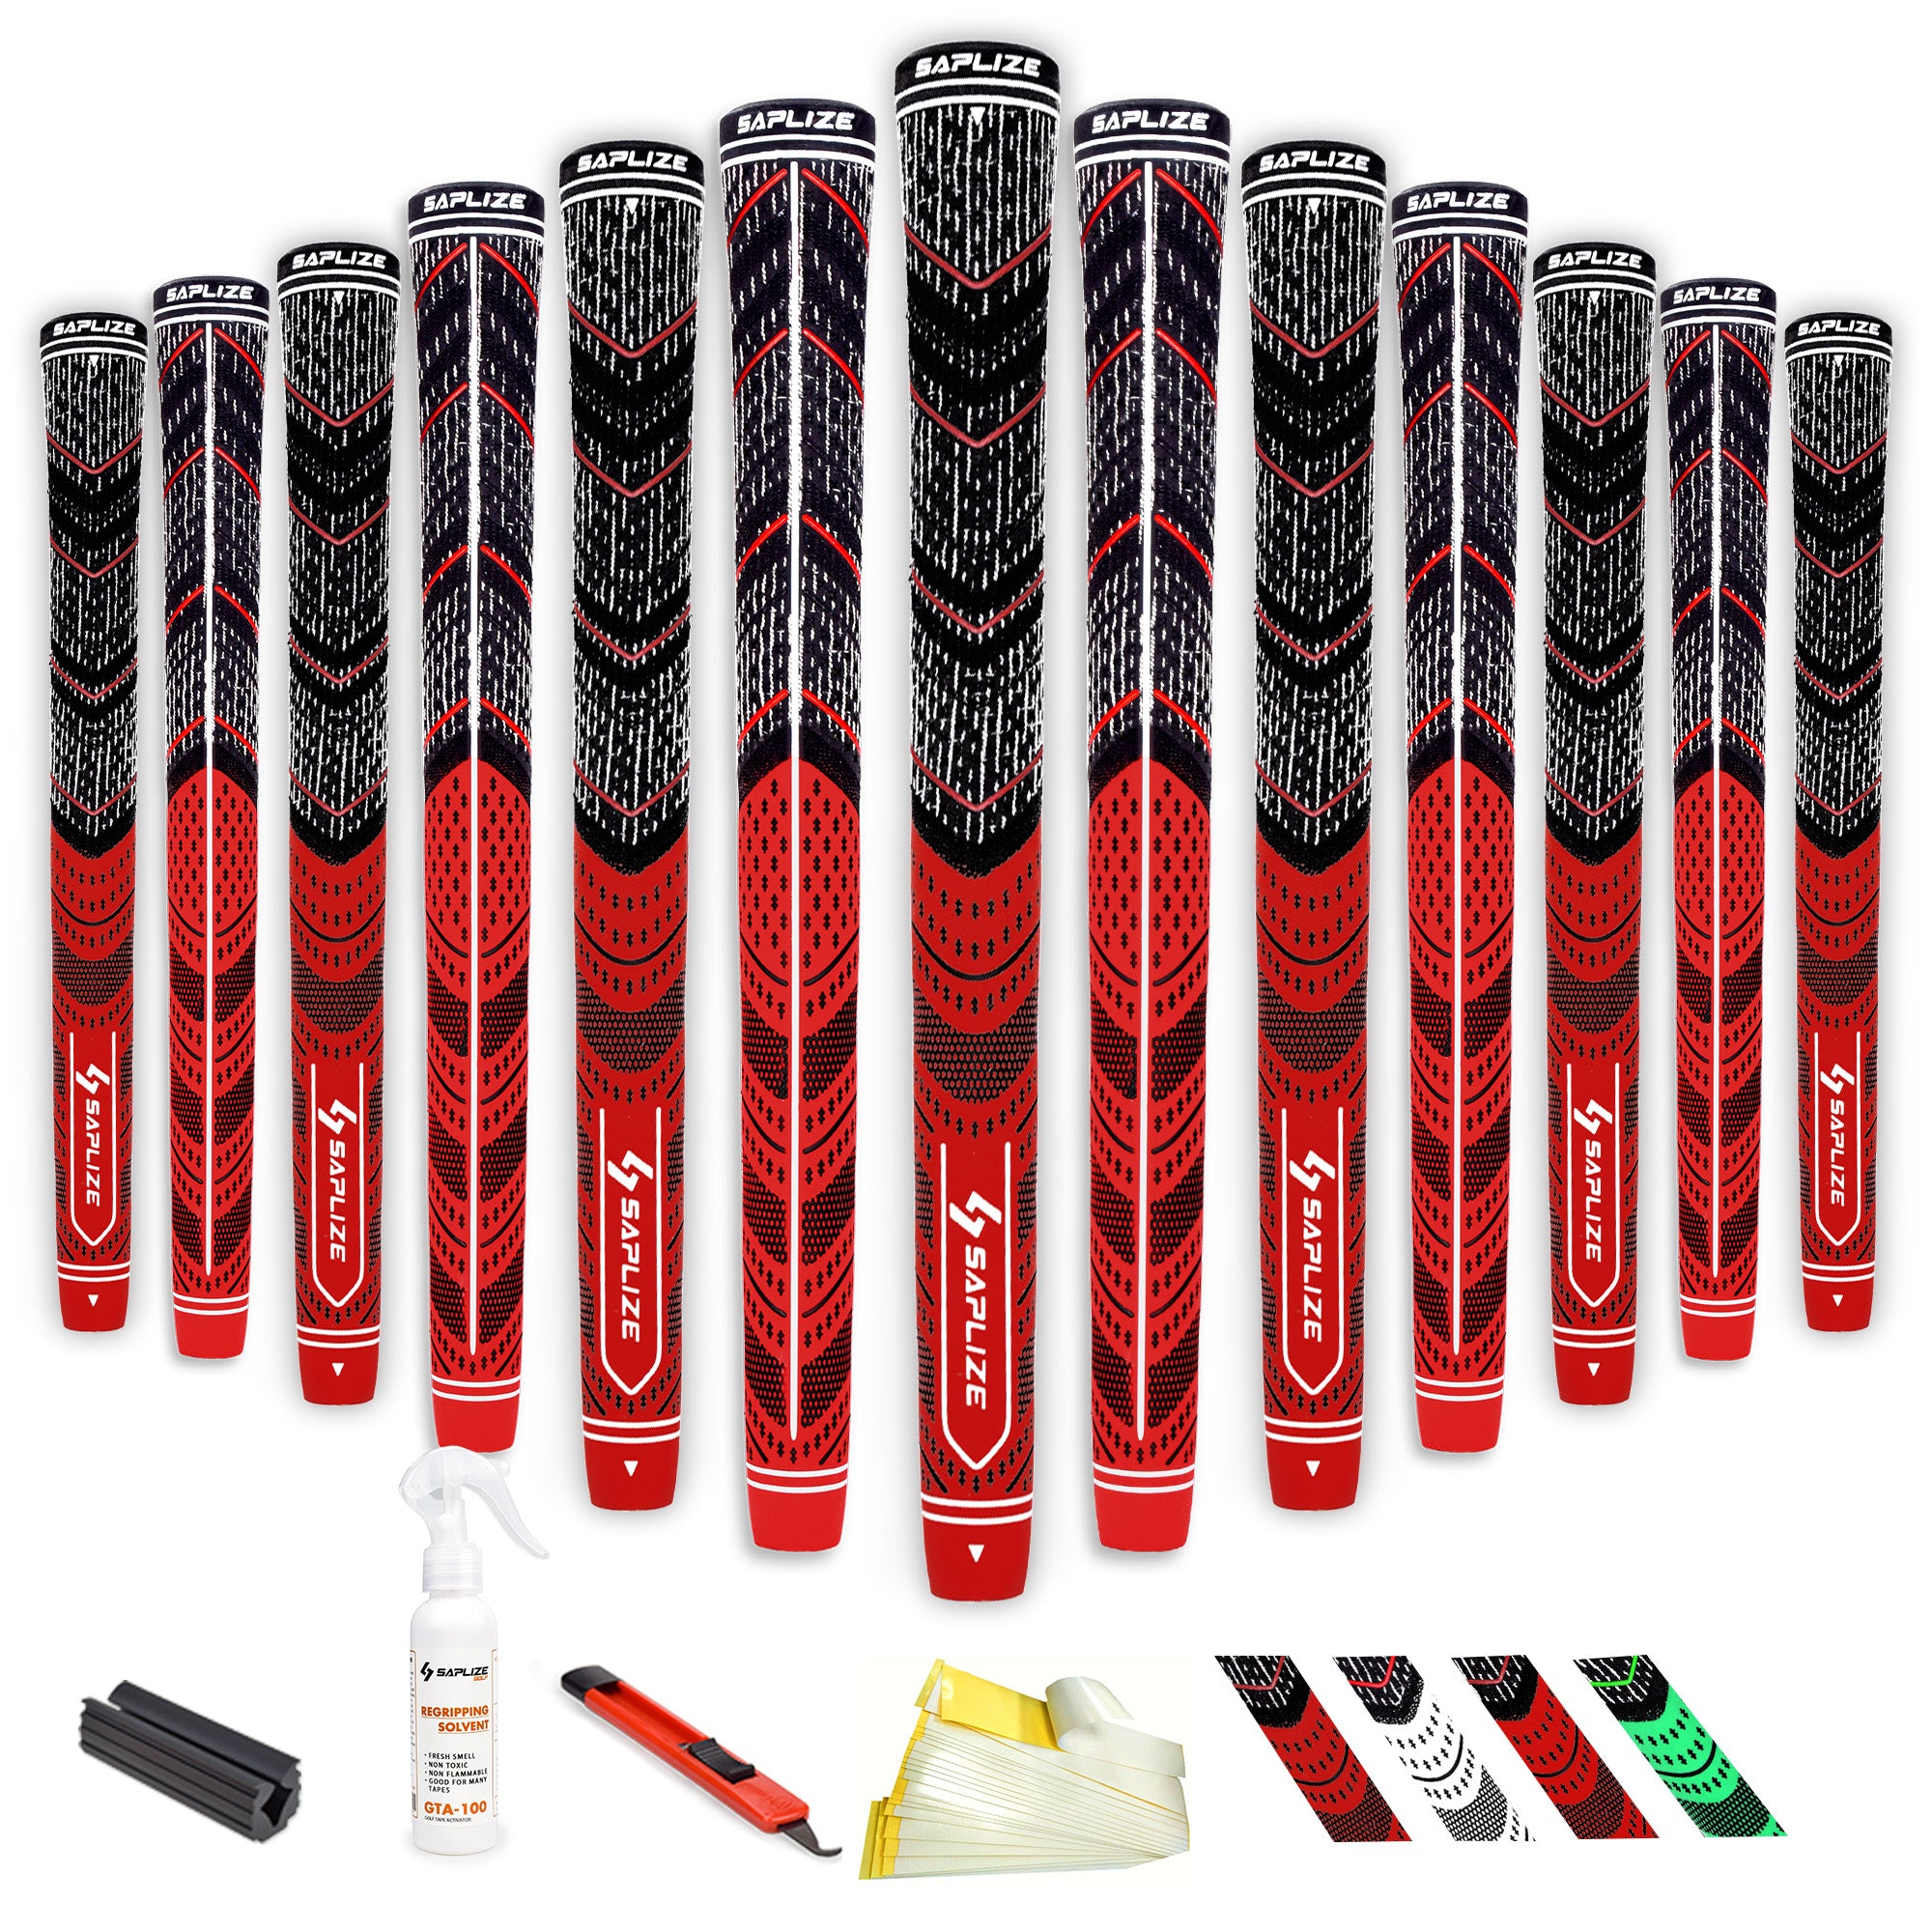 CL04 Corded Rubber Golf Grips 13 pcs Pack with Solvent Kit